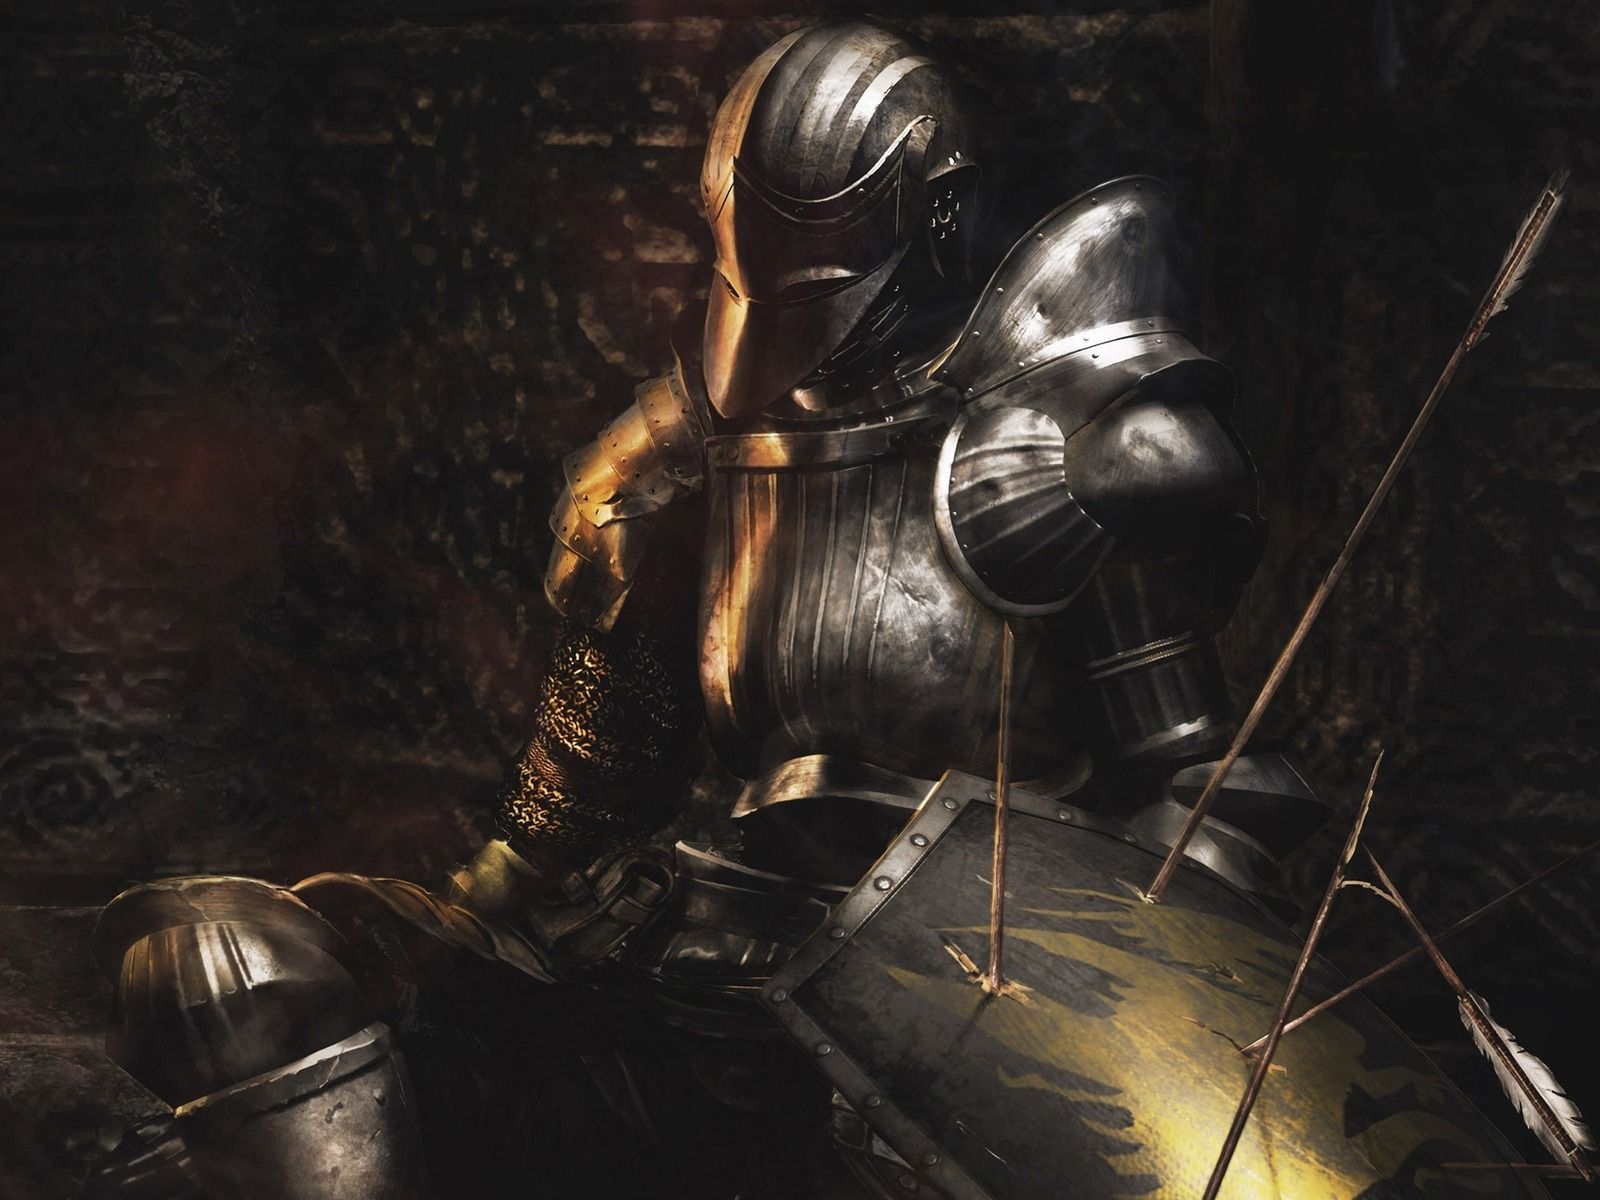 defeated-knight 1600 x 1200 Wallpaper